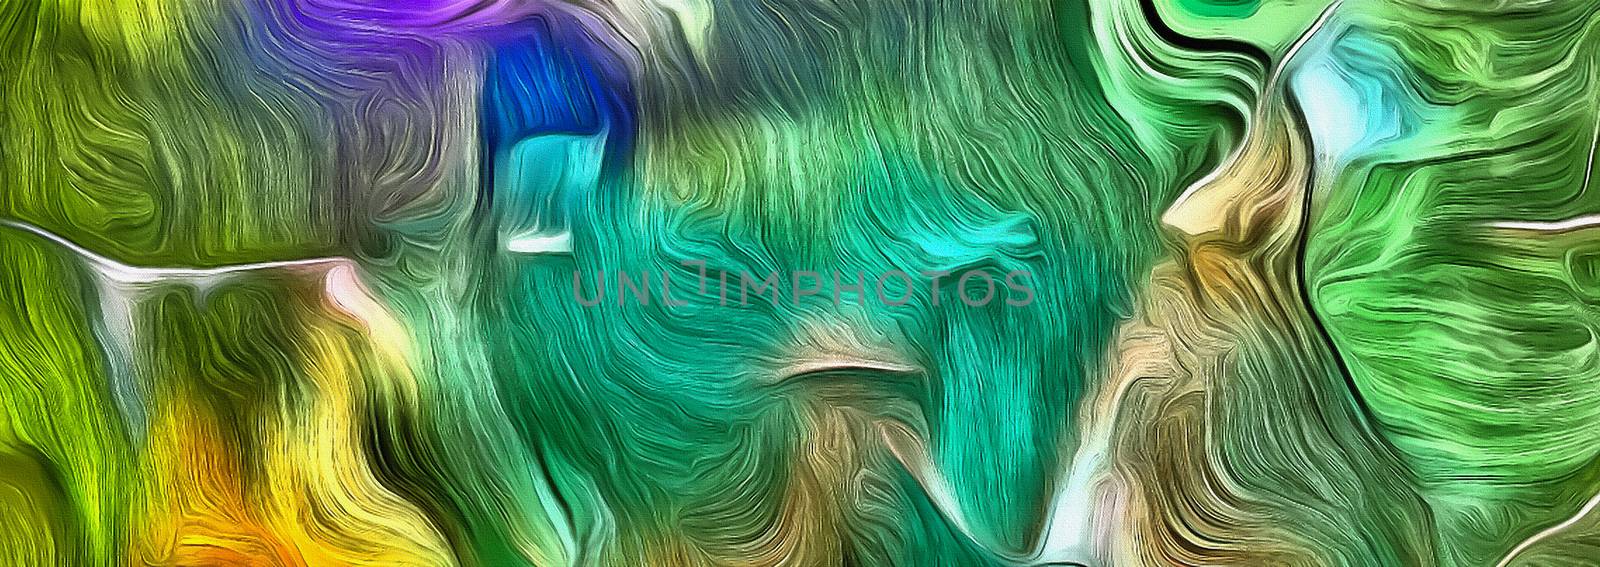 Fluid lines of color movement. Green is a main color. Oil painting. 3D rendering